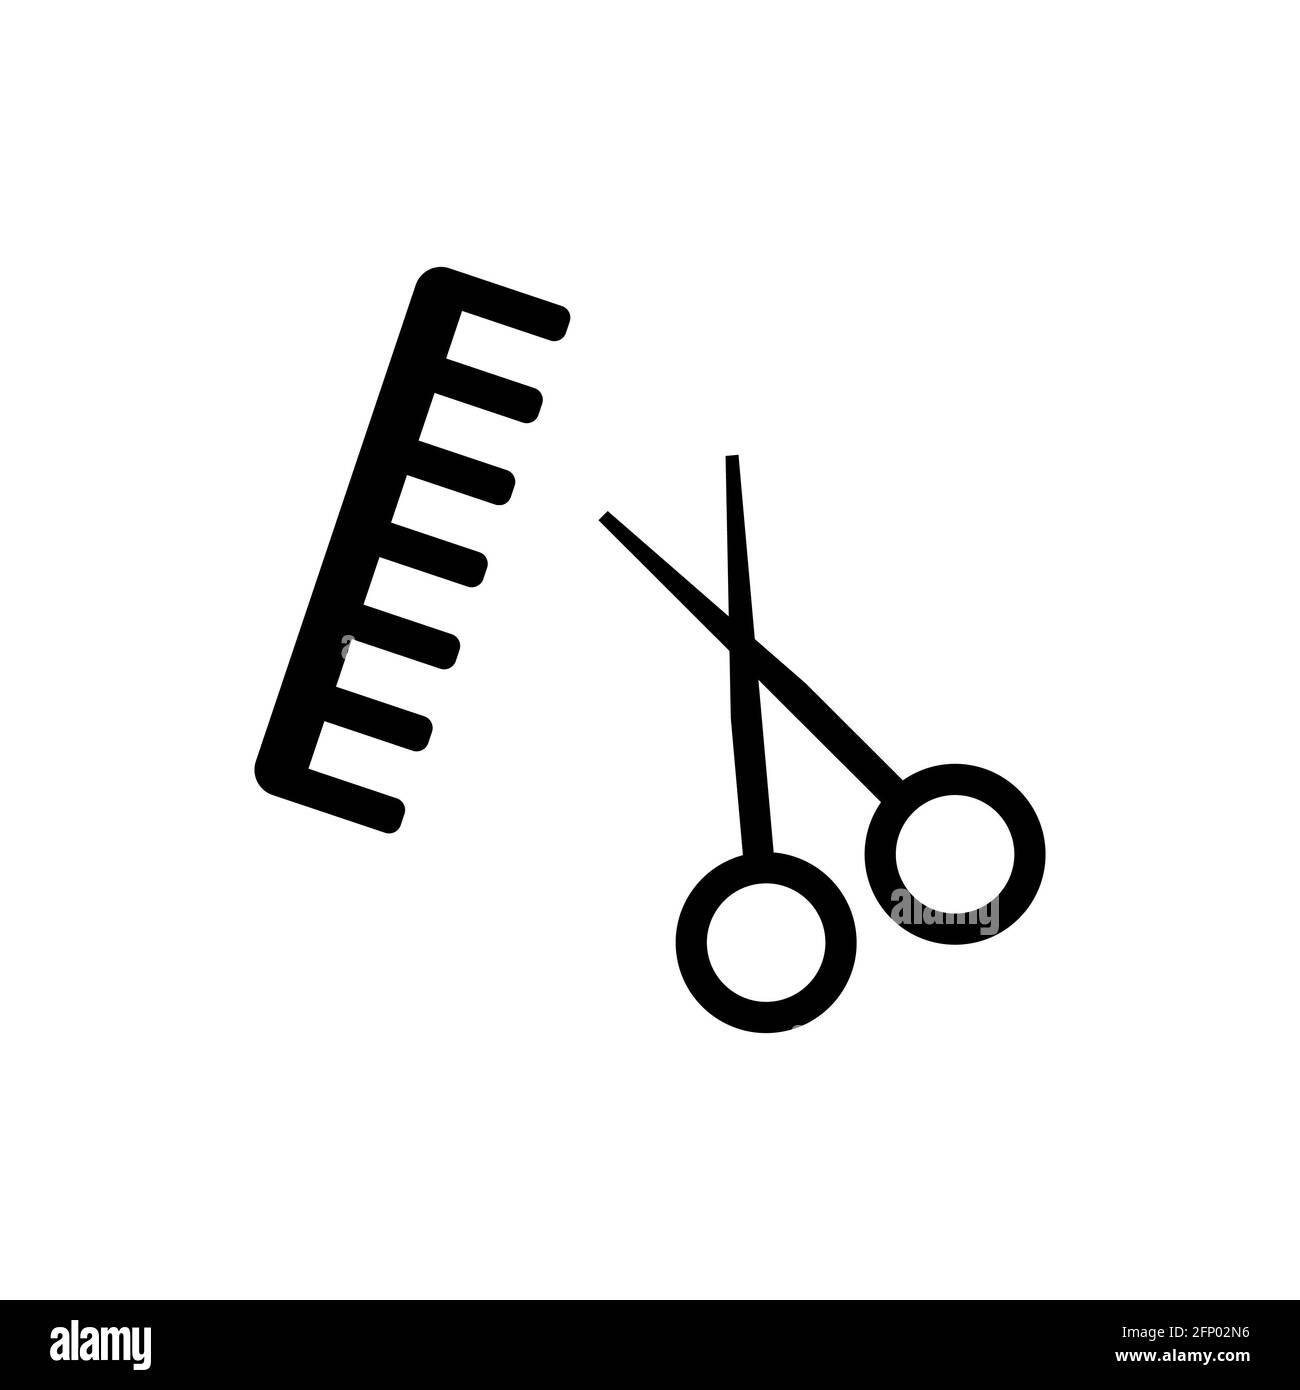 Comb and scissors on a white background. illustration of a simple logo on a white background. Stock Photo